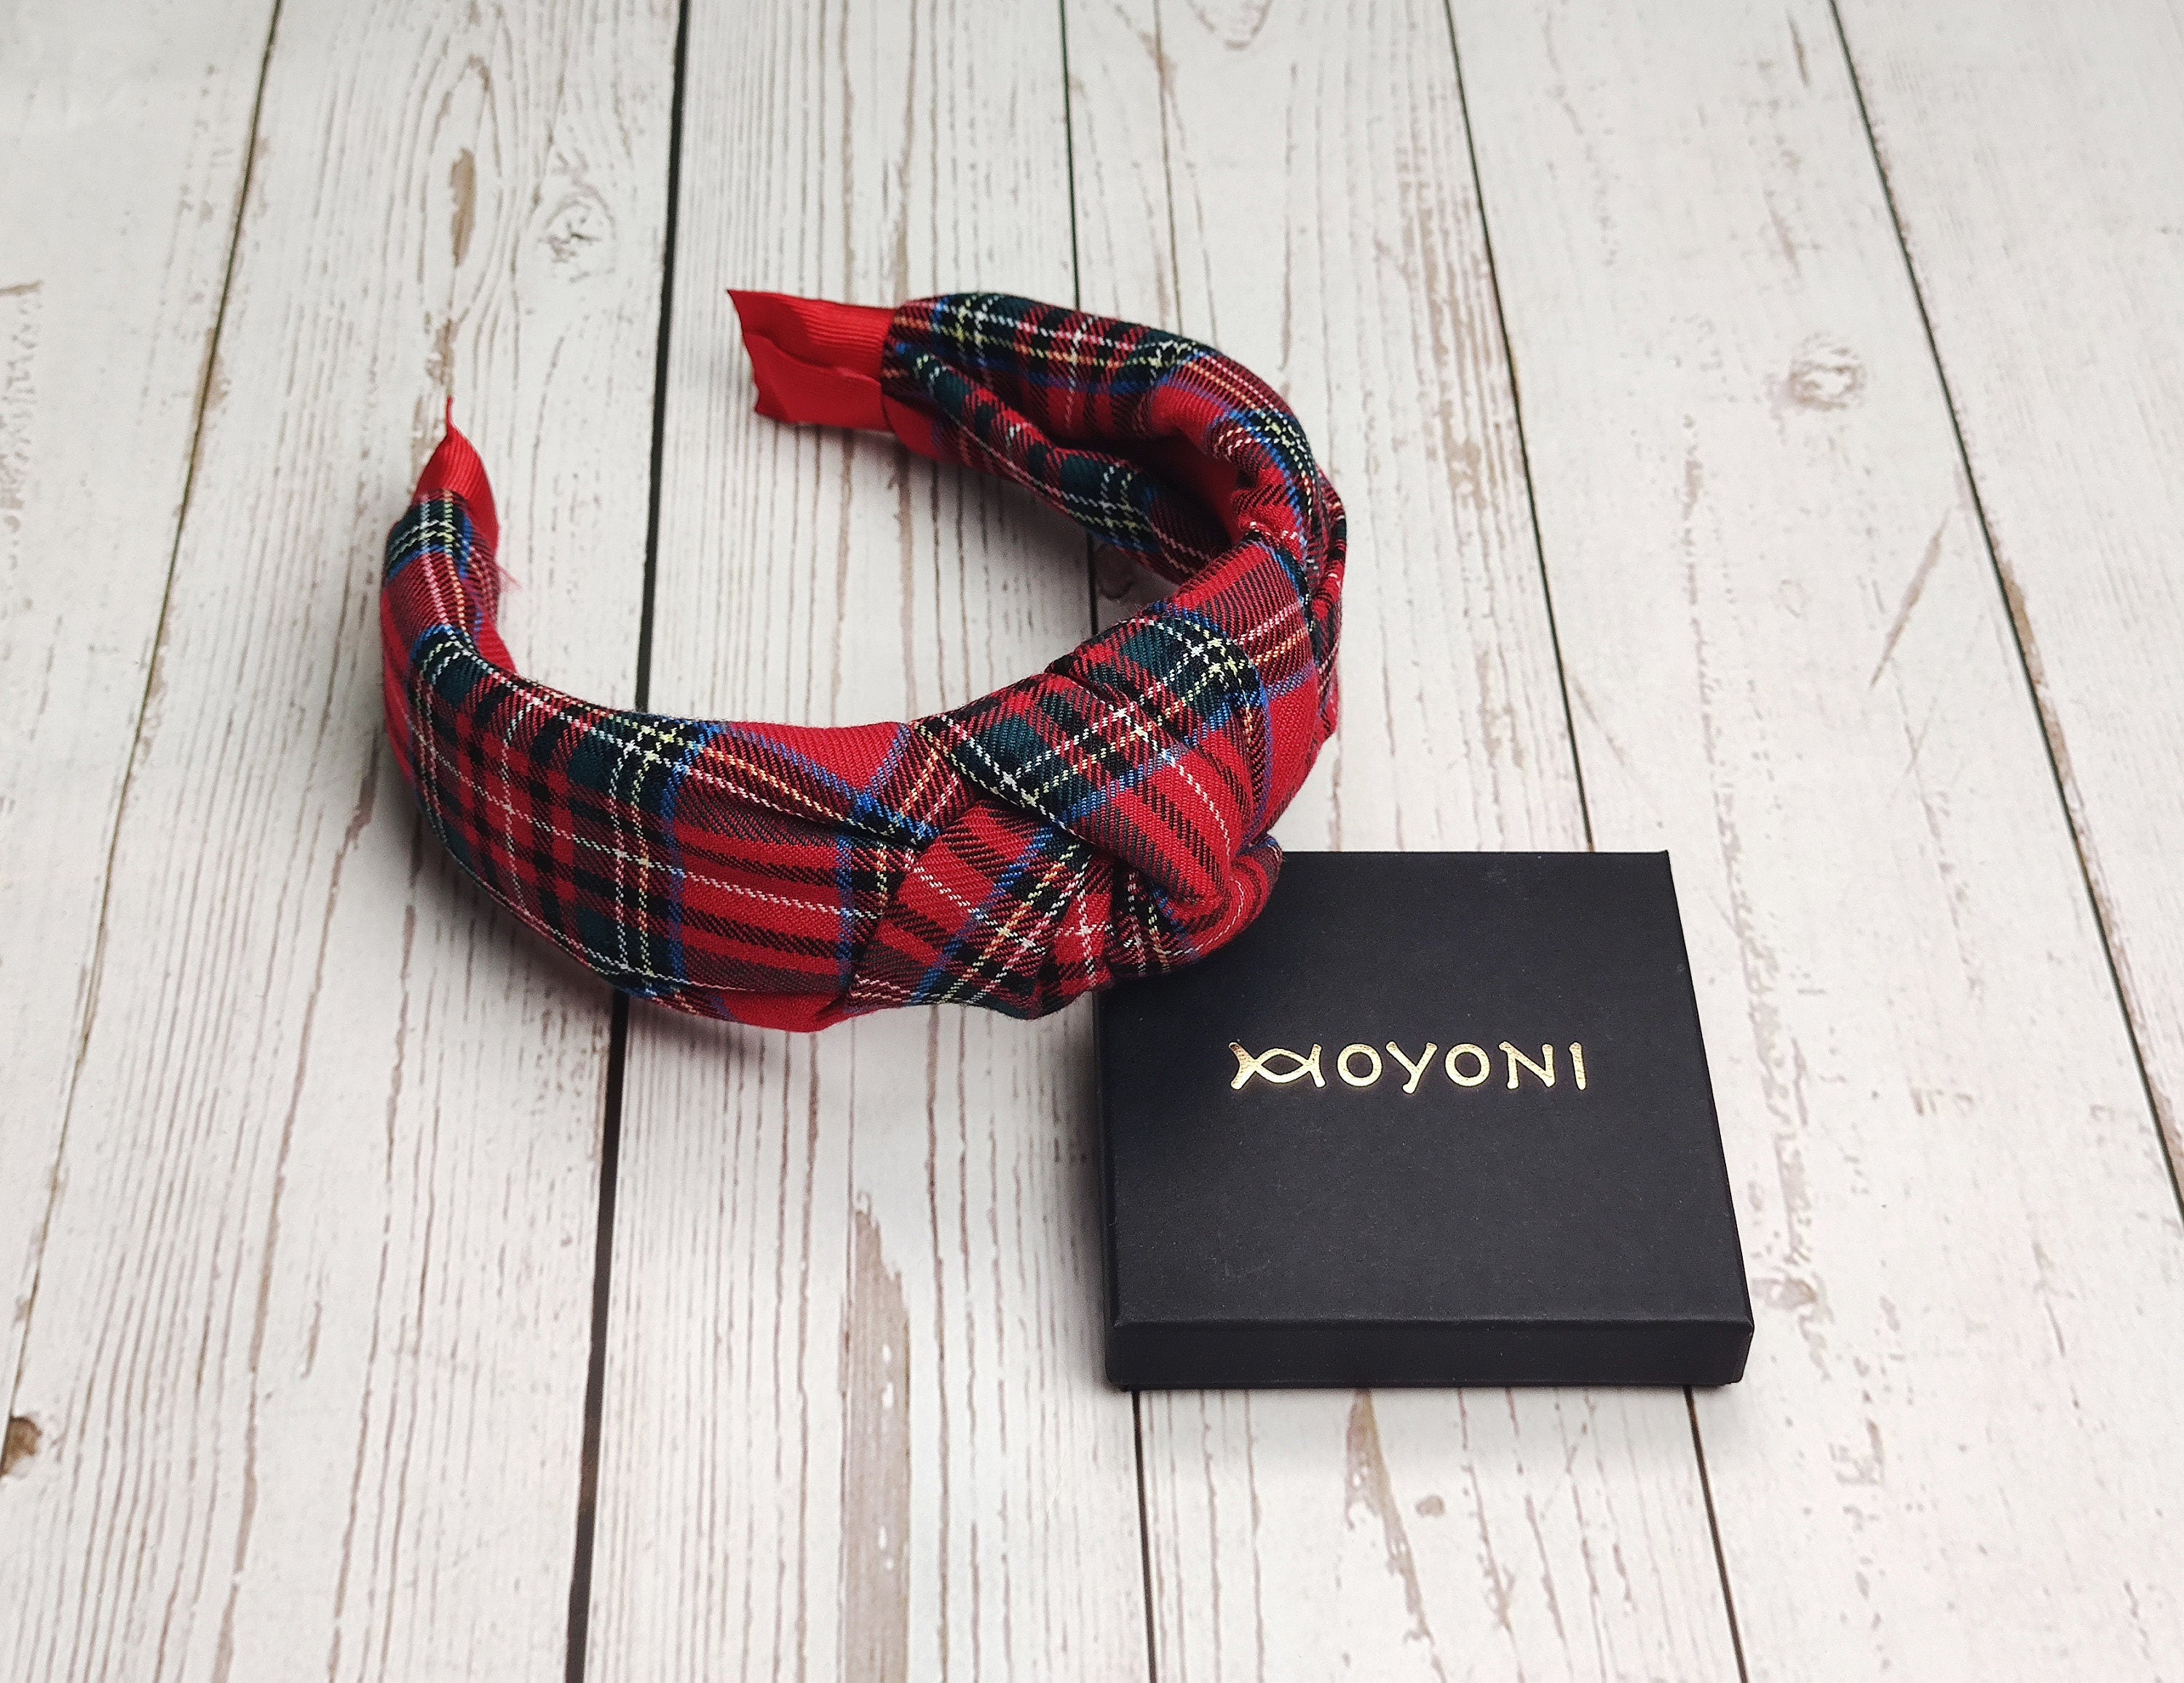 If you are looking for the perfect headband, then you have come to the right place! Our collection of red plaid pattern headbands provides a beautiful pattern to adorn your hair while keeping it warm and comfortable.